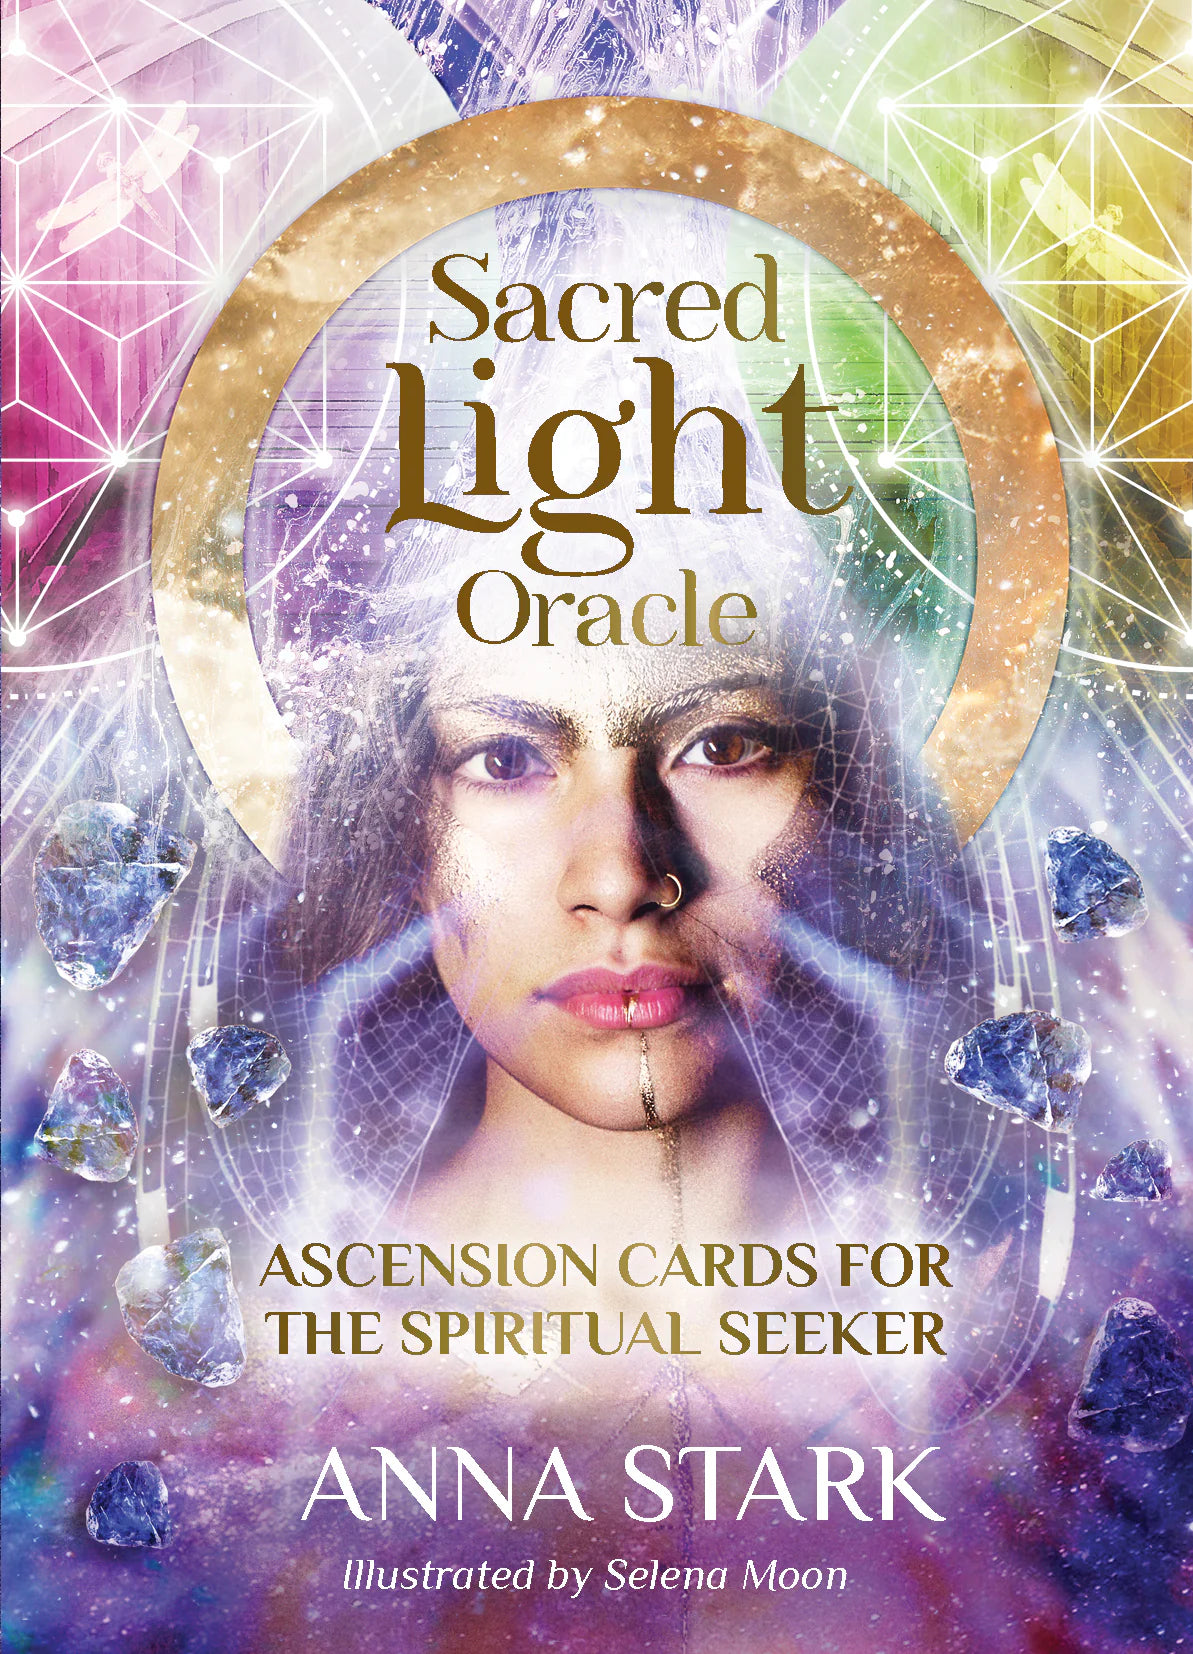 Sacred Light Oracle Ascension cards for the spiritual seeker